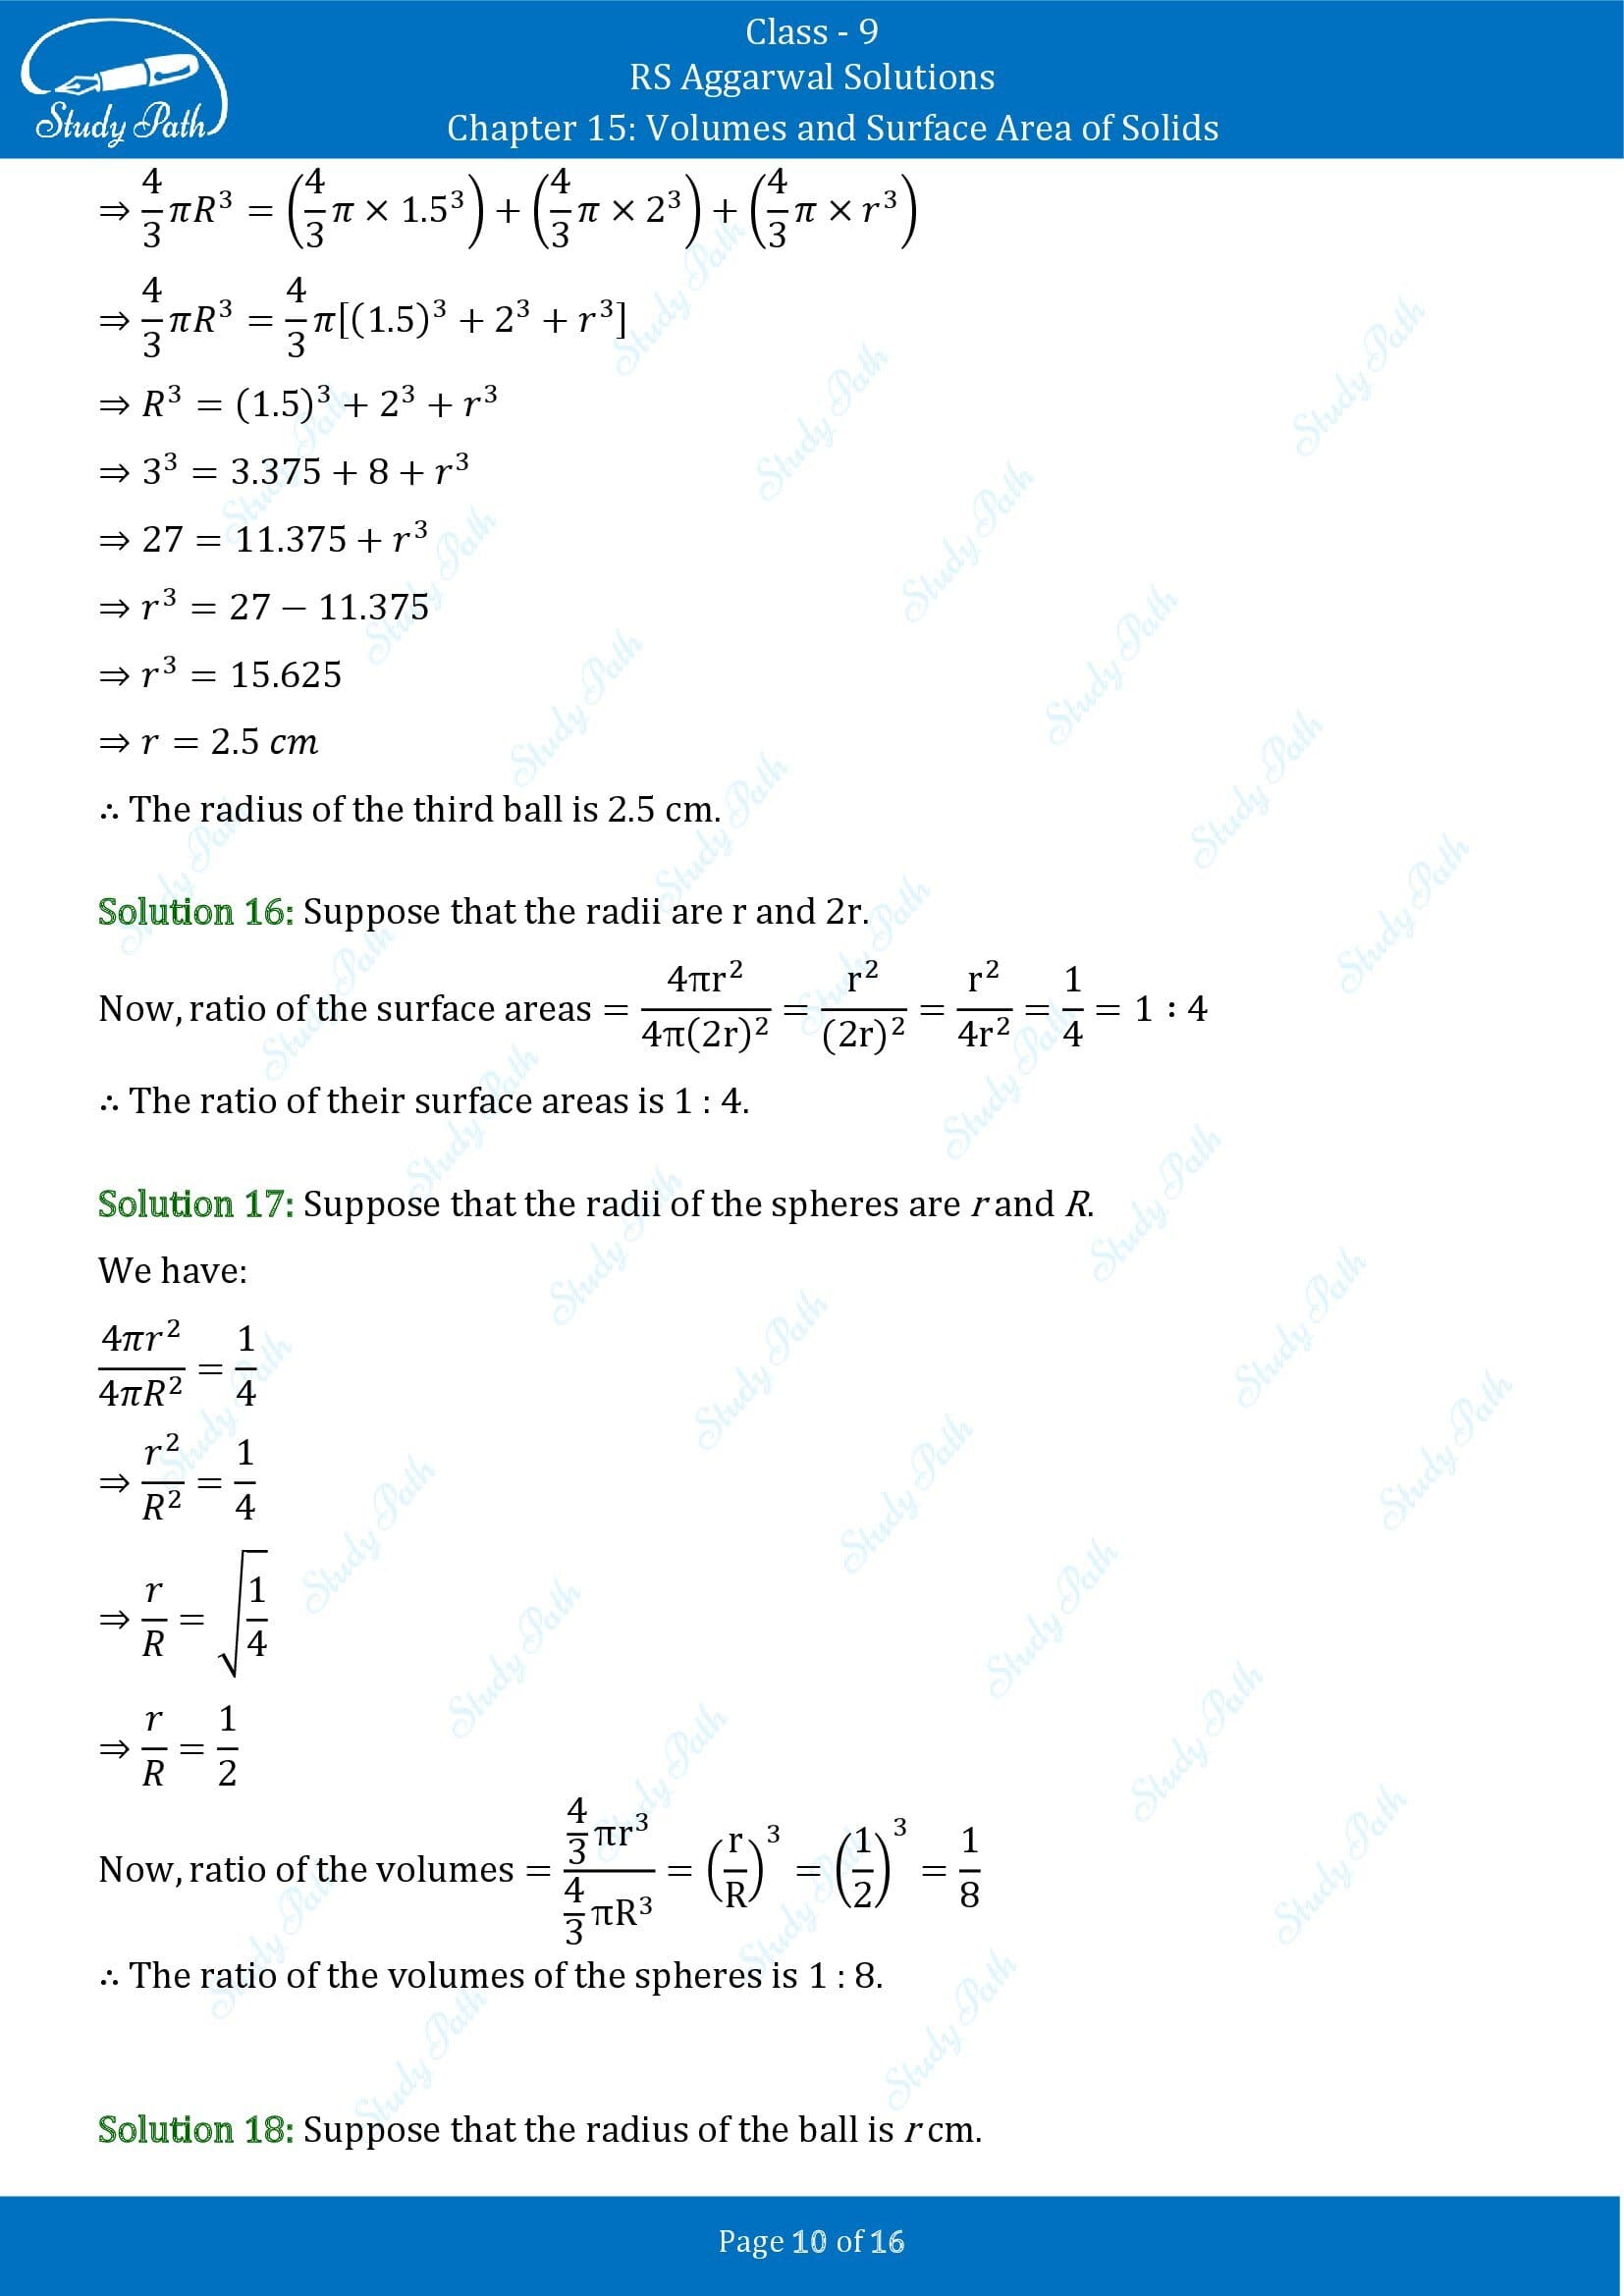 RS Aggarwal Solutions Class 9 Chapter 15 Volumes and Surface Area of Solids Exercise 15D 00010